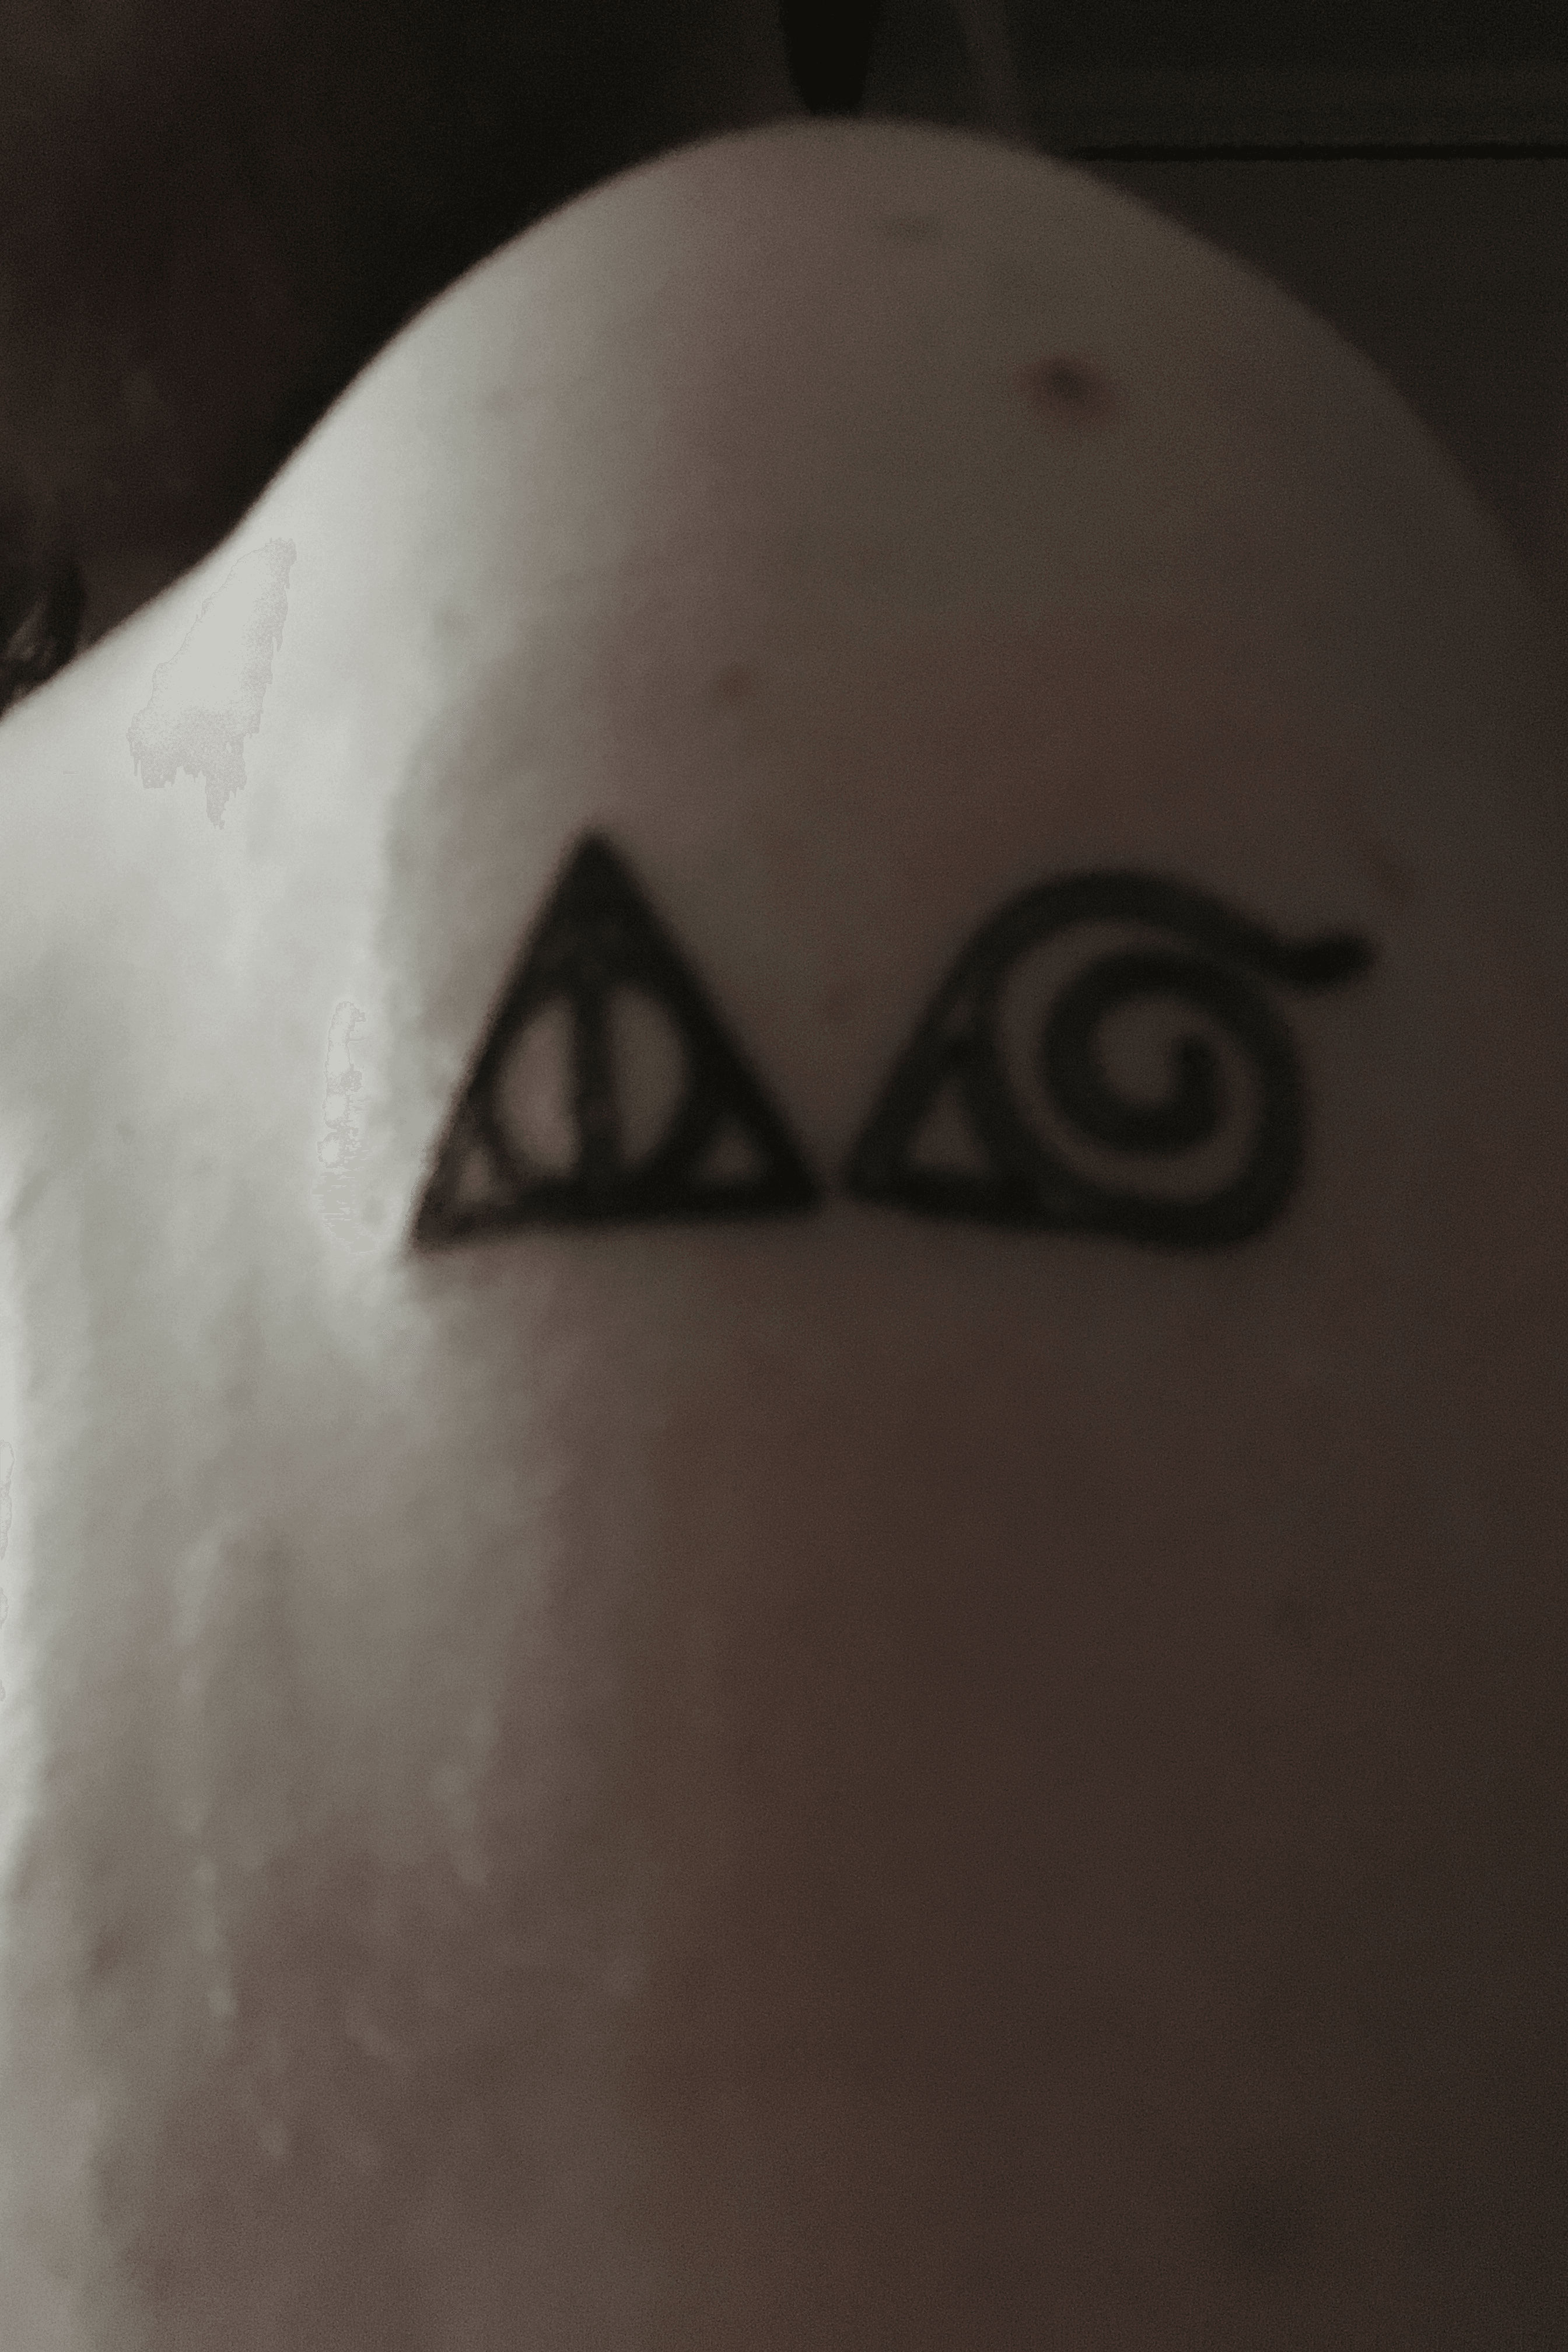 Got a little symbol from a humble village tattooed today  rNaruto